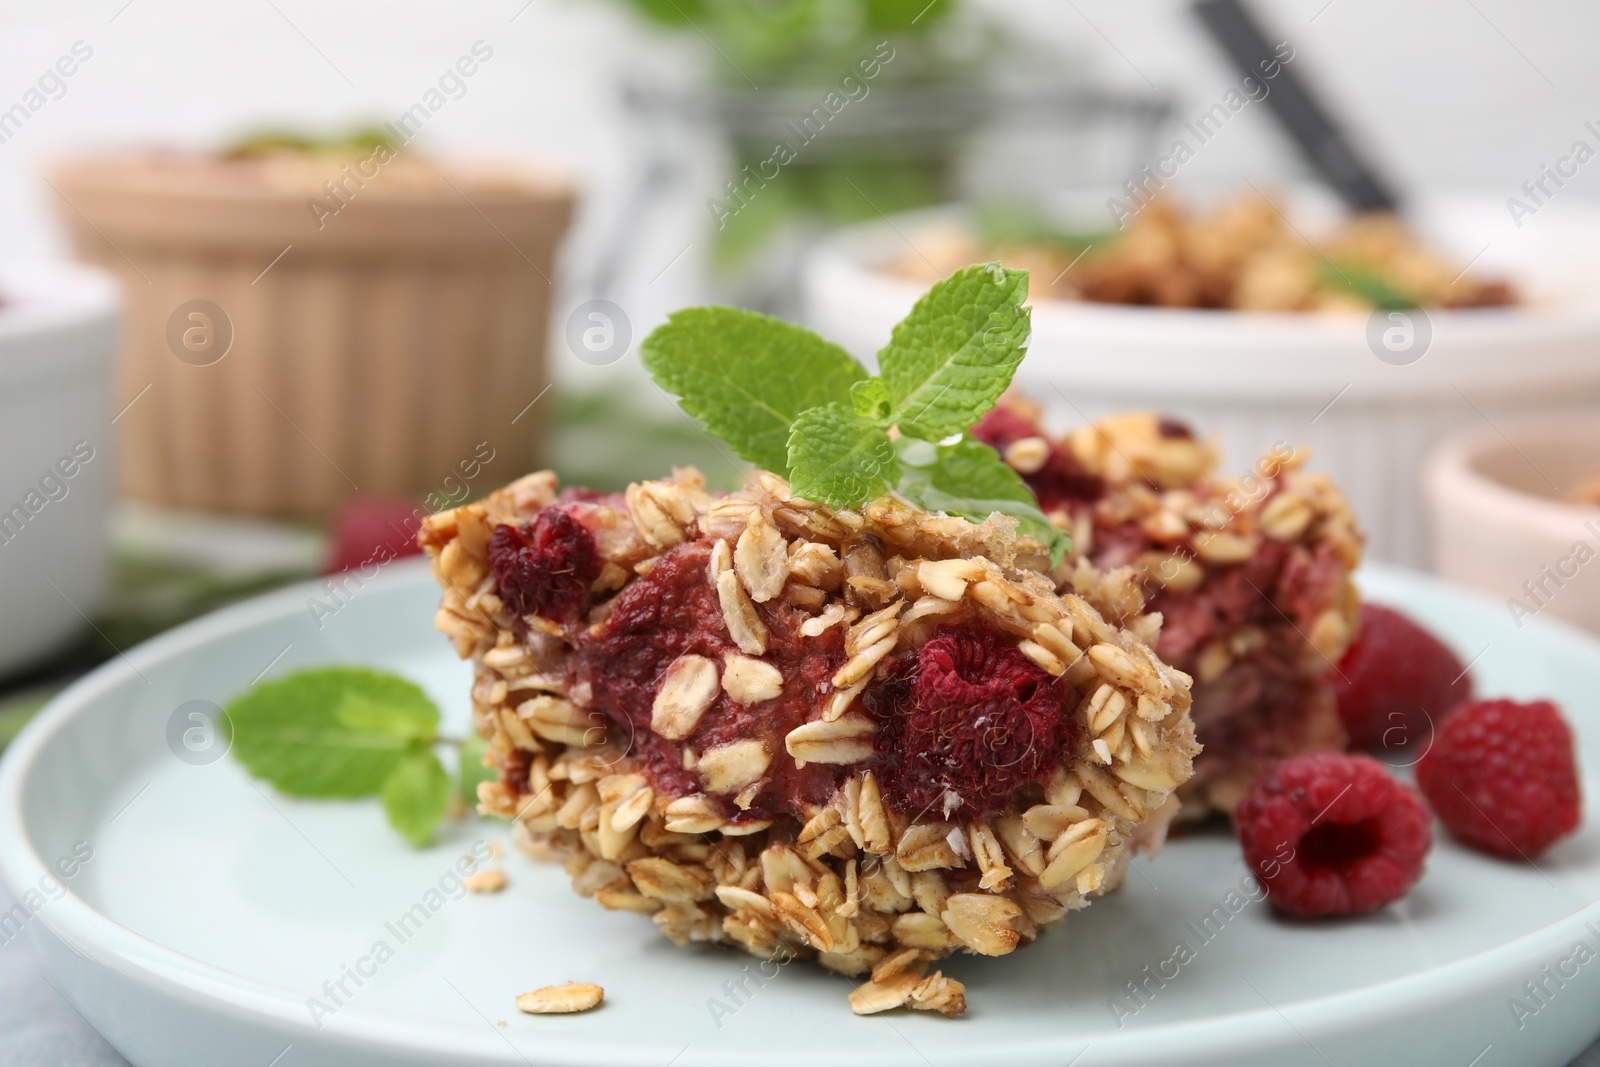 Photo of Tasty baked oatmeal with raspberries on table, closeup